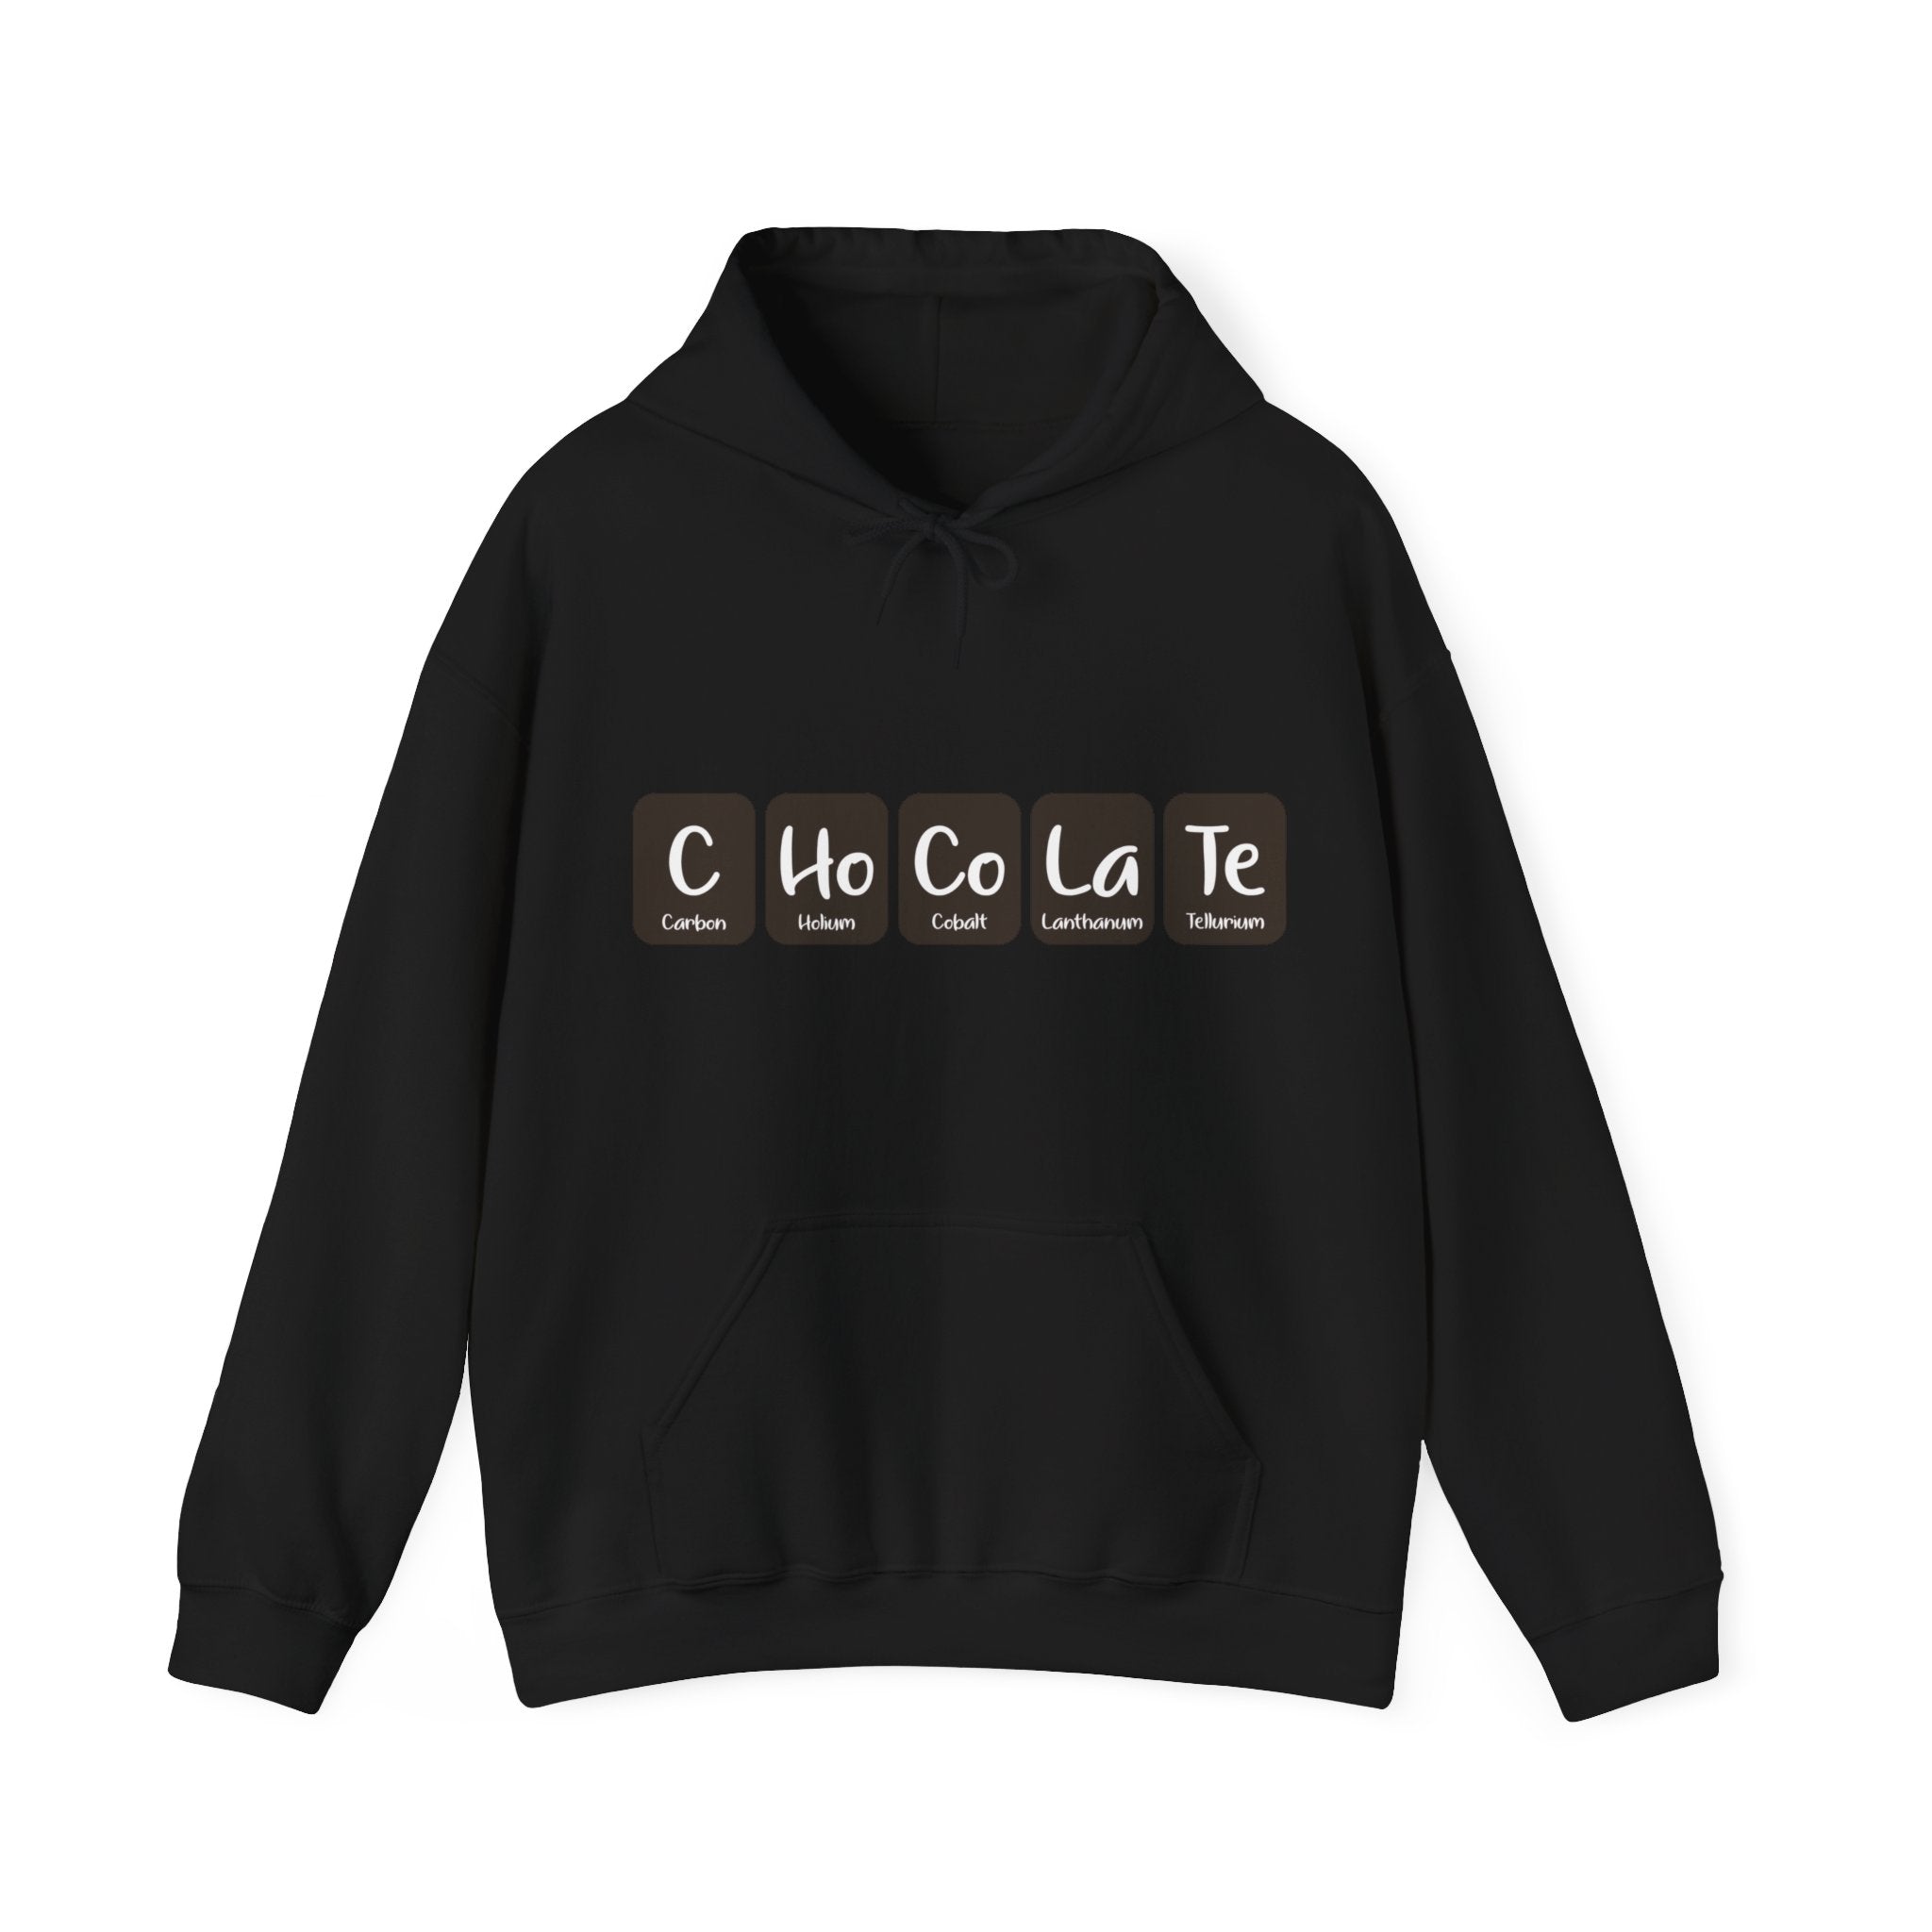 Fashion-forward black **C-Ho-Co-La-Te - Hooded Sweatshirt** featuring a C-Ho-Co-La-Te design on the chest, spelling "CHOCO LATE" with elements from the periodic table.